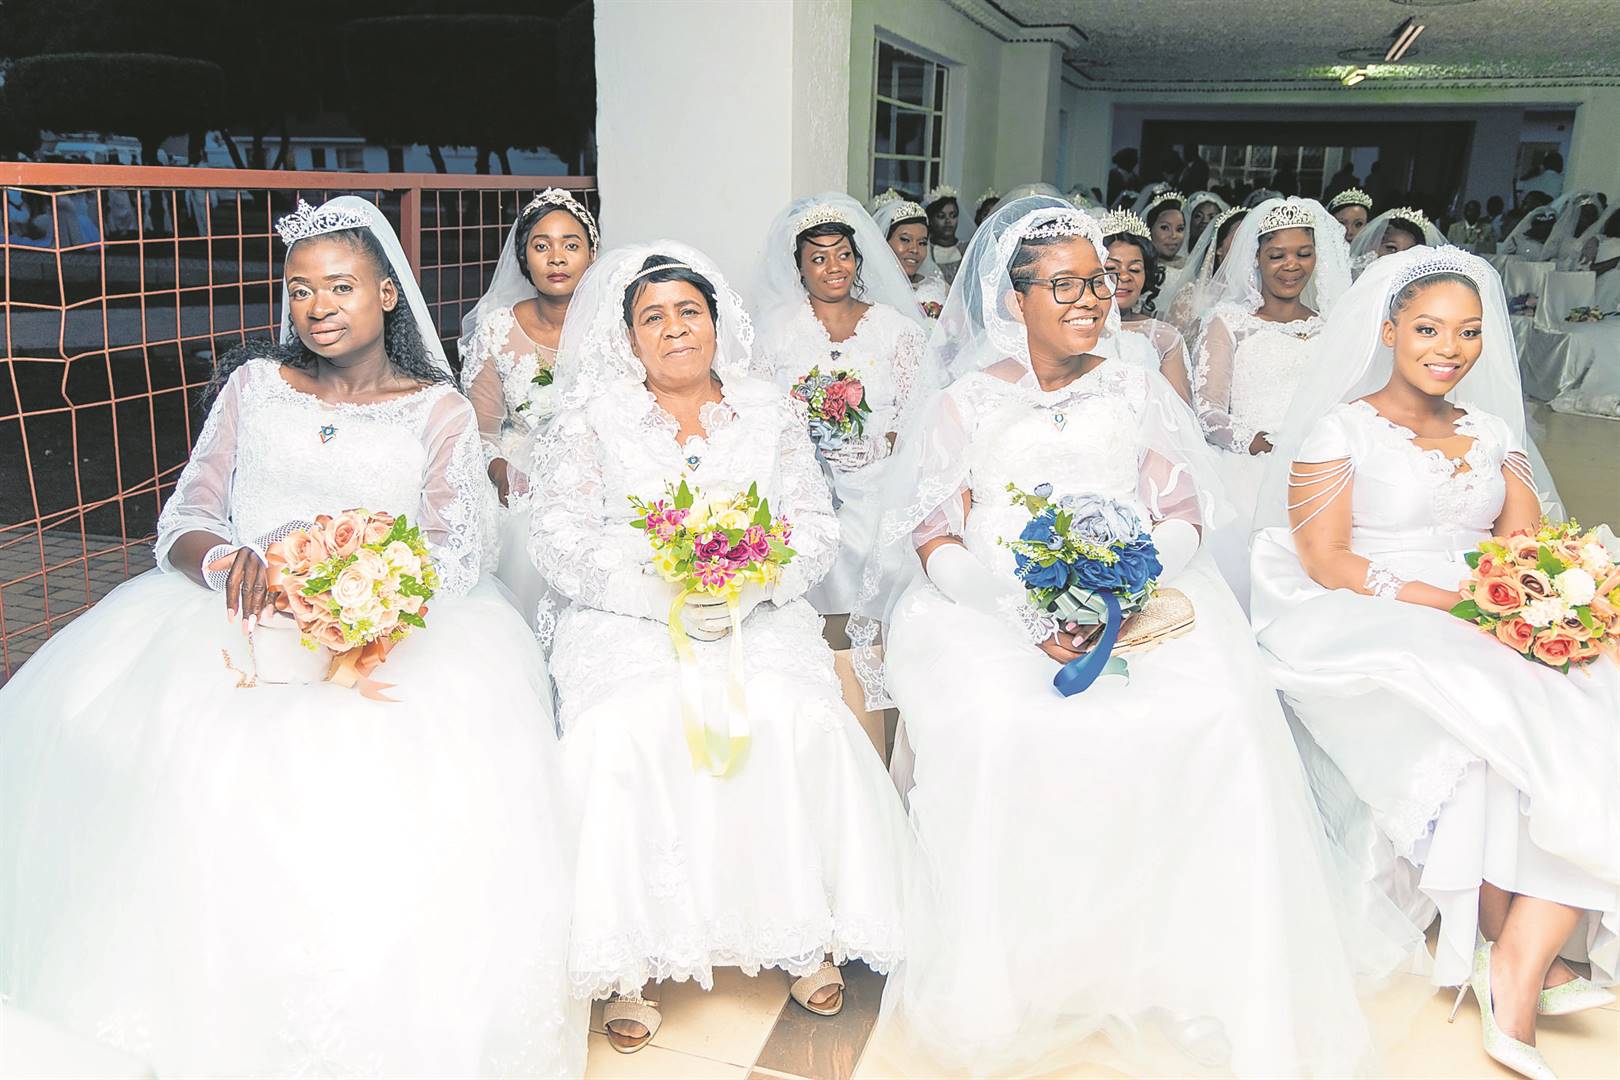 KWAKUHLE KWETHU!: The International Pentecost Holiness Church (IPHC) held its mass wedding ceremony, where over 50 lovebirds walked down the aisle.